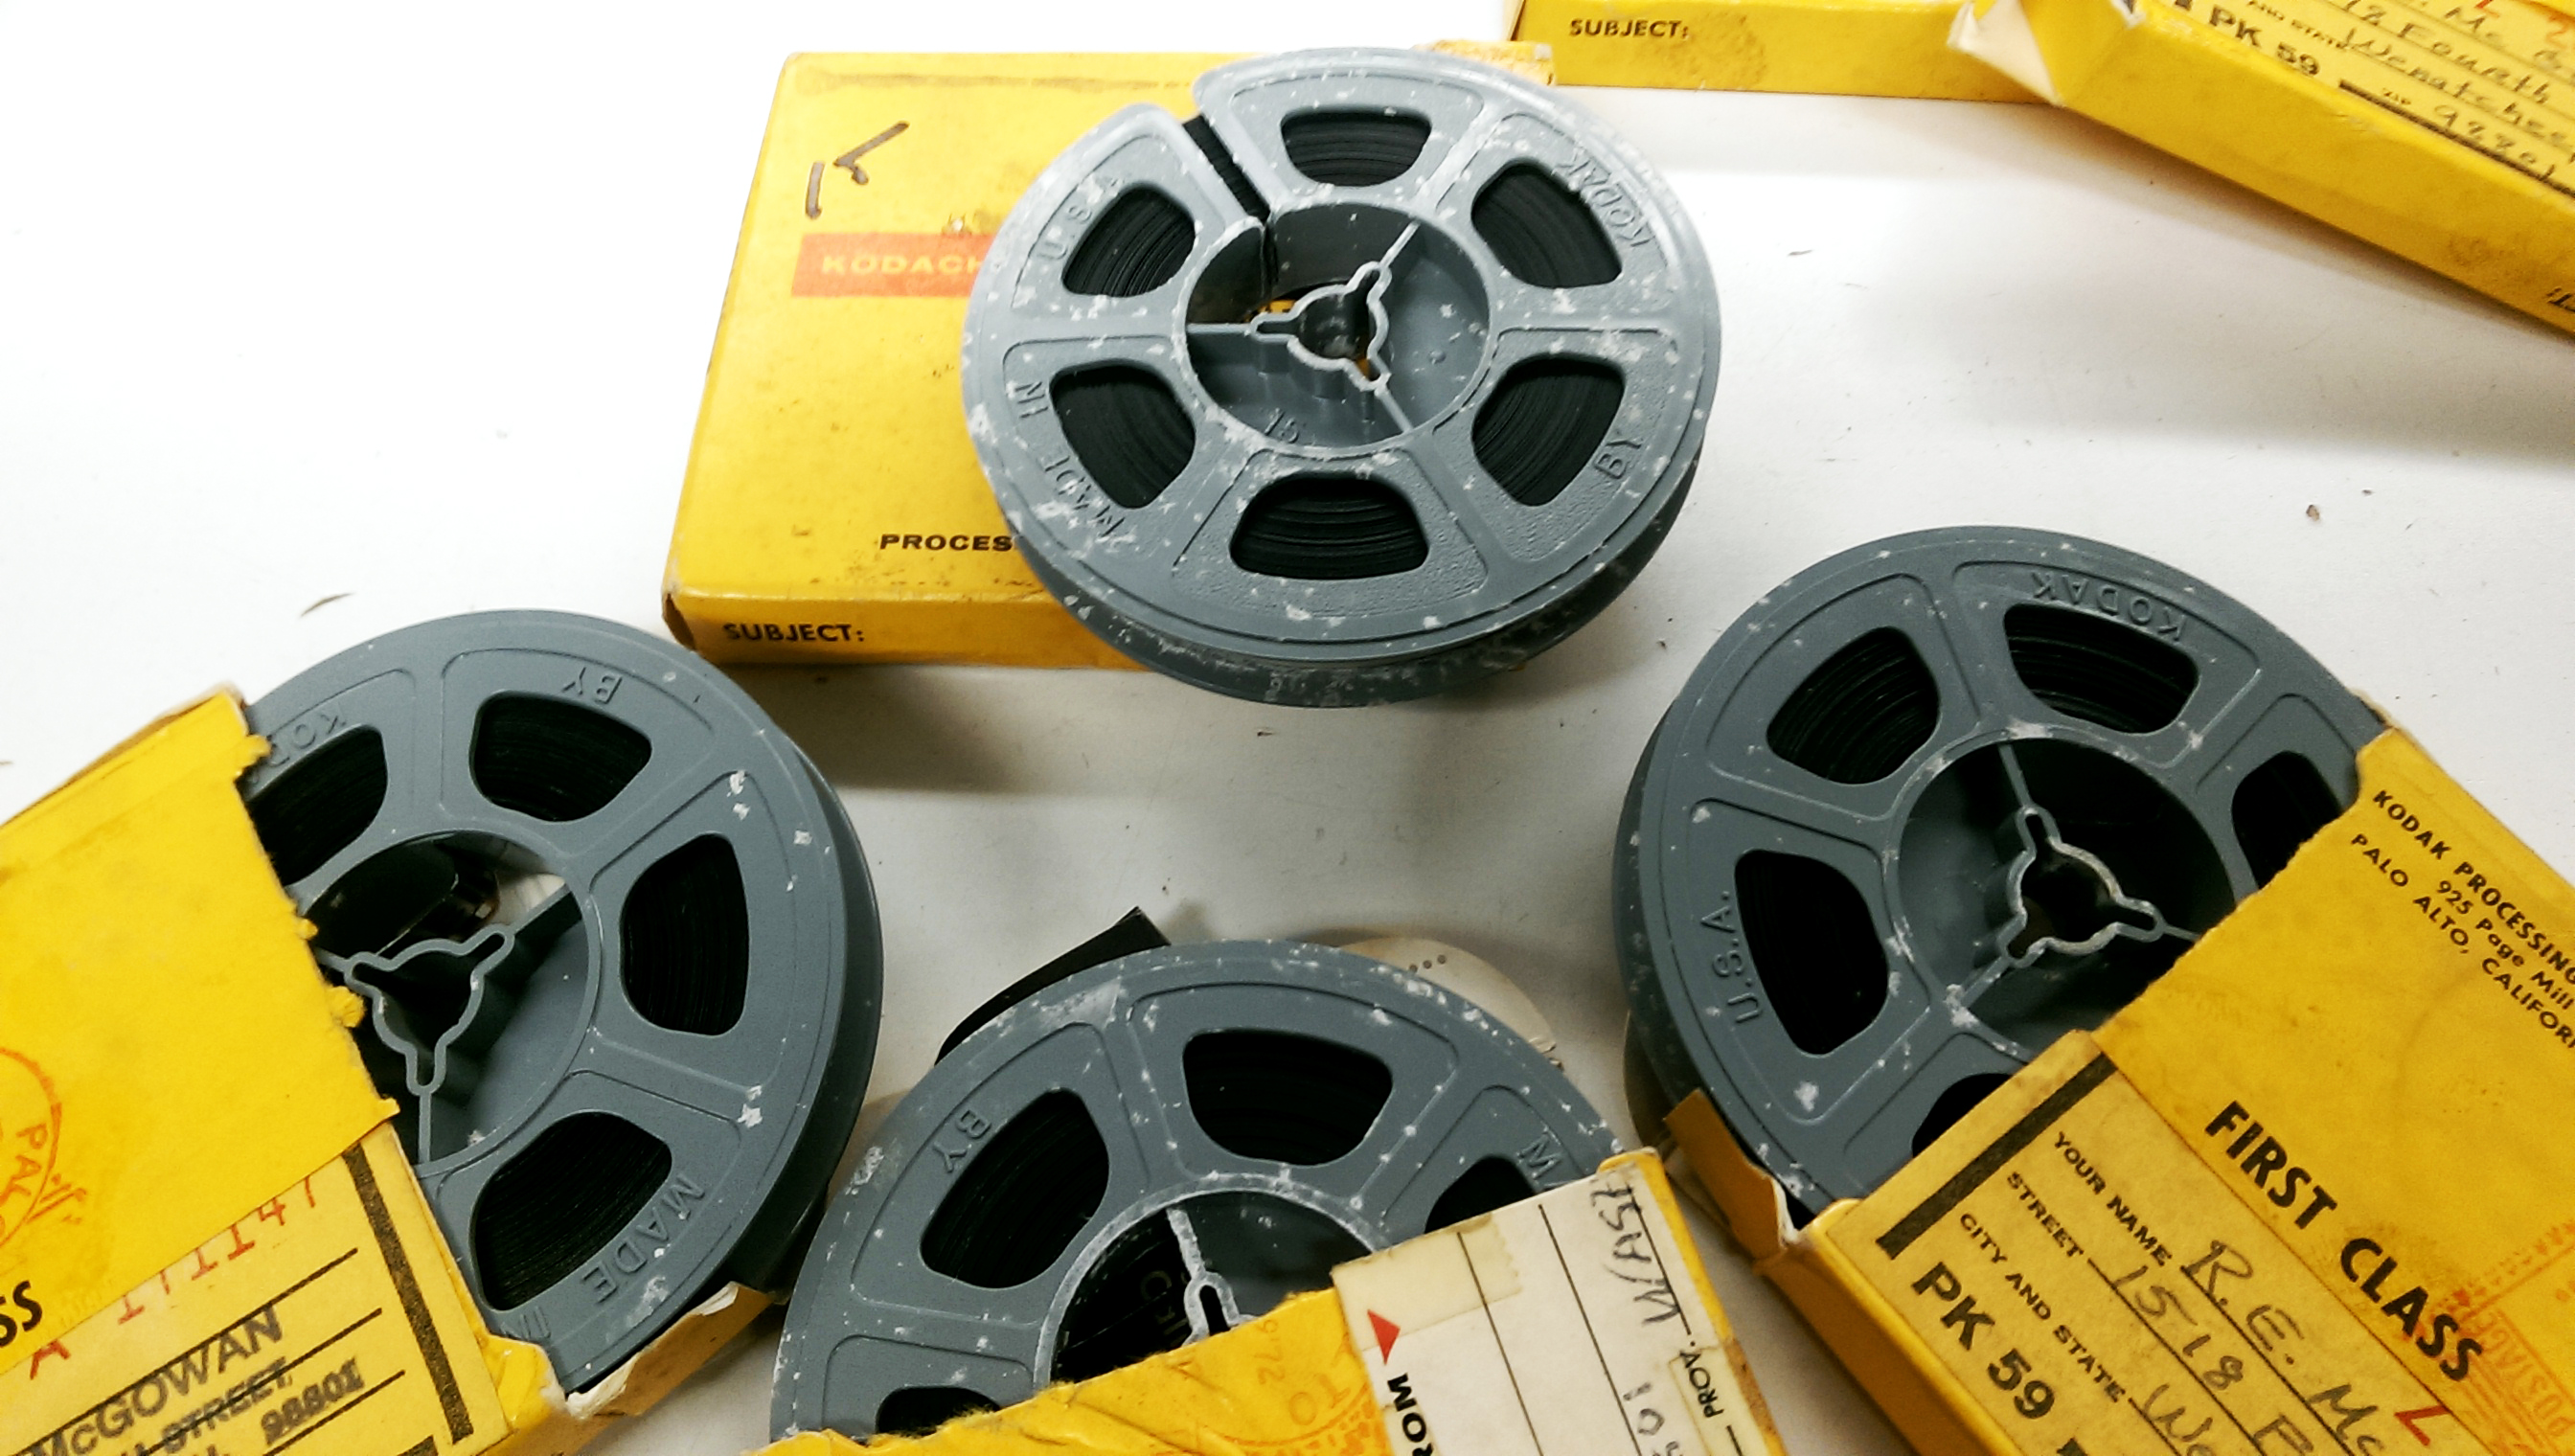 Don't Let Moldy Film Ruin Your 8mm, 16mm and Super 8 Film Collection